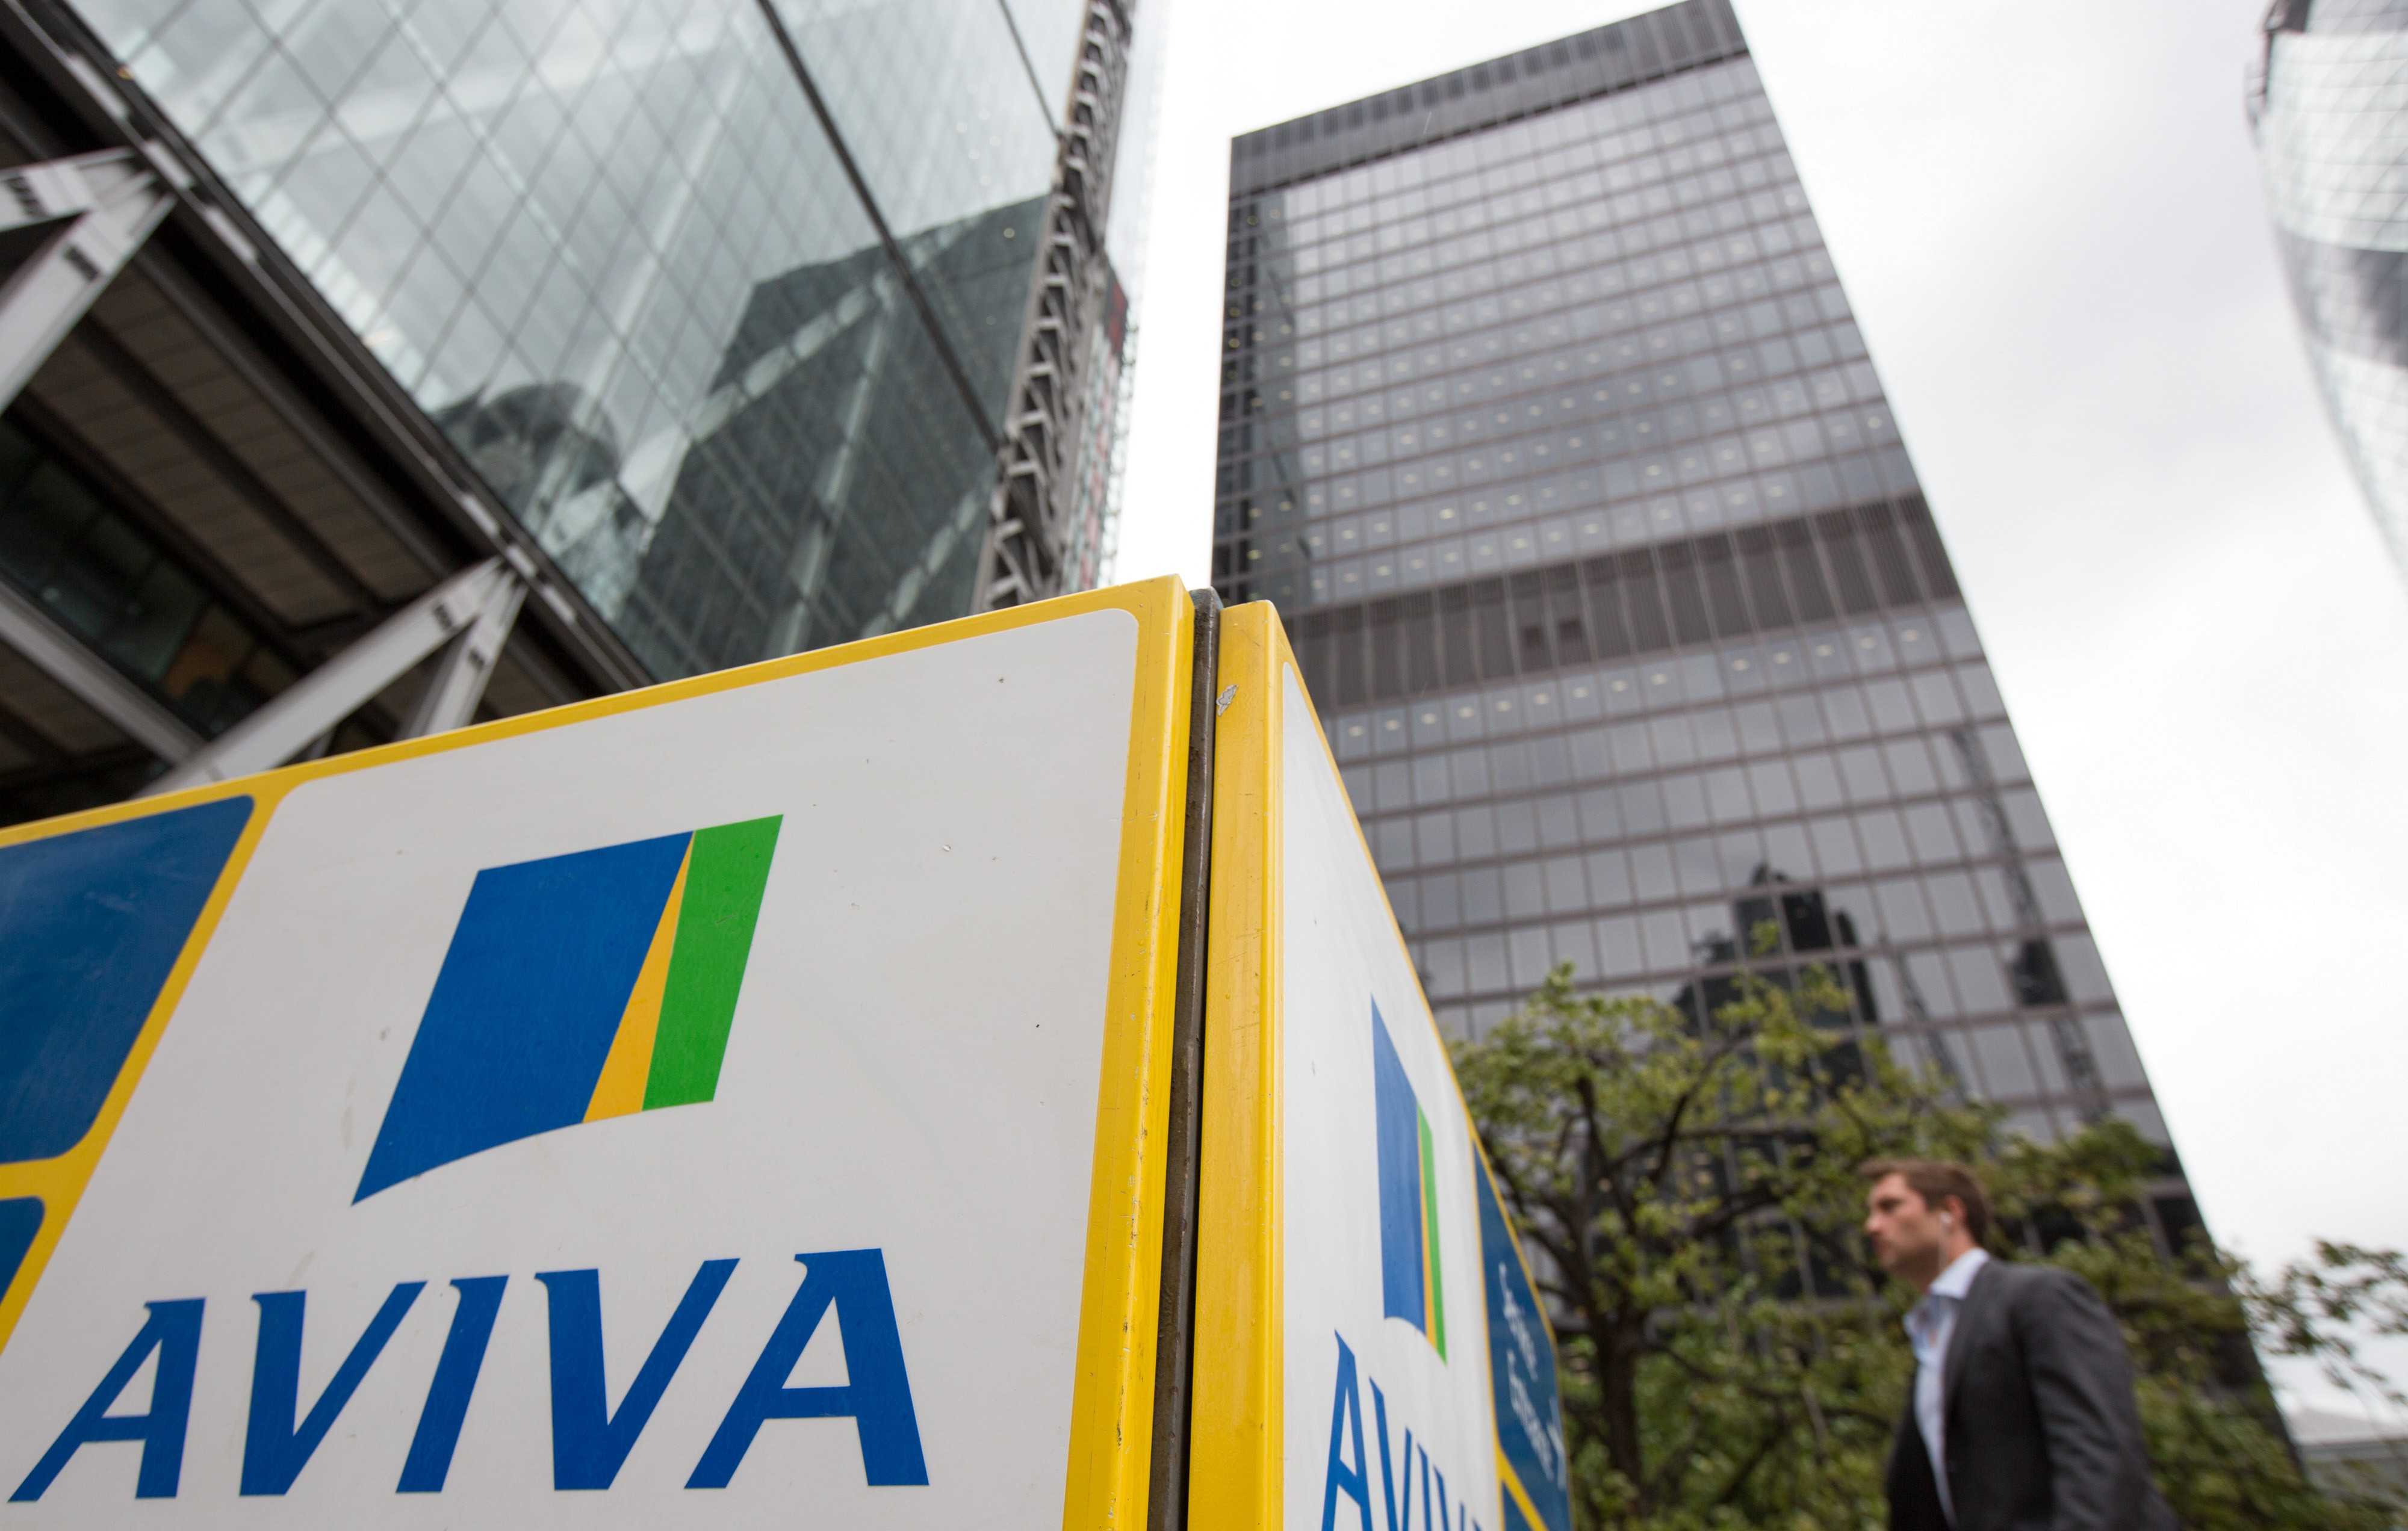 A pedestrian walks near to an Aviva Plc logo on a sign outside the insurance company's headquarters in London, U.K., on Monday, Aug. 1, 2016. Aviva will release their half-year results on Aug 4. Photographer: Jason Alden/Bloomberg